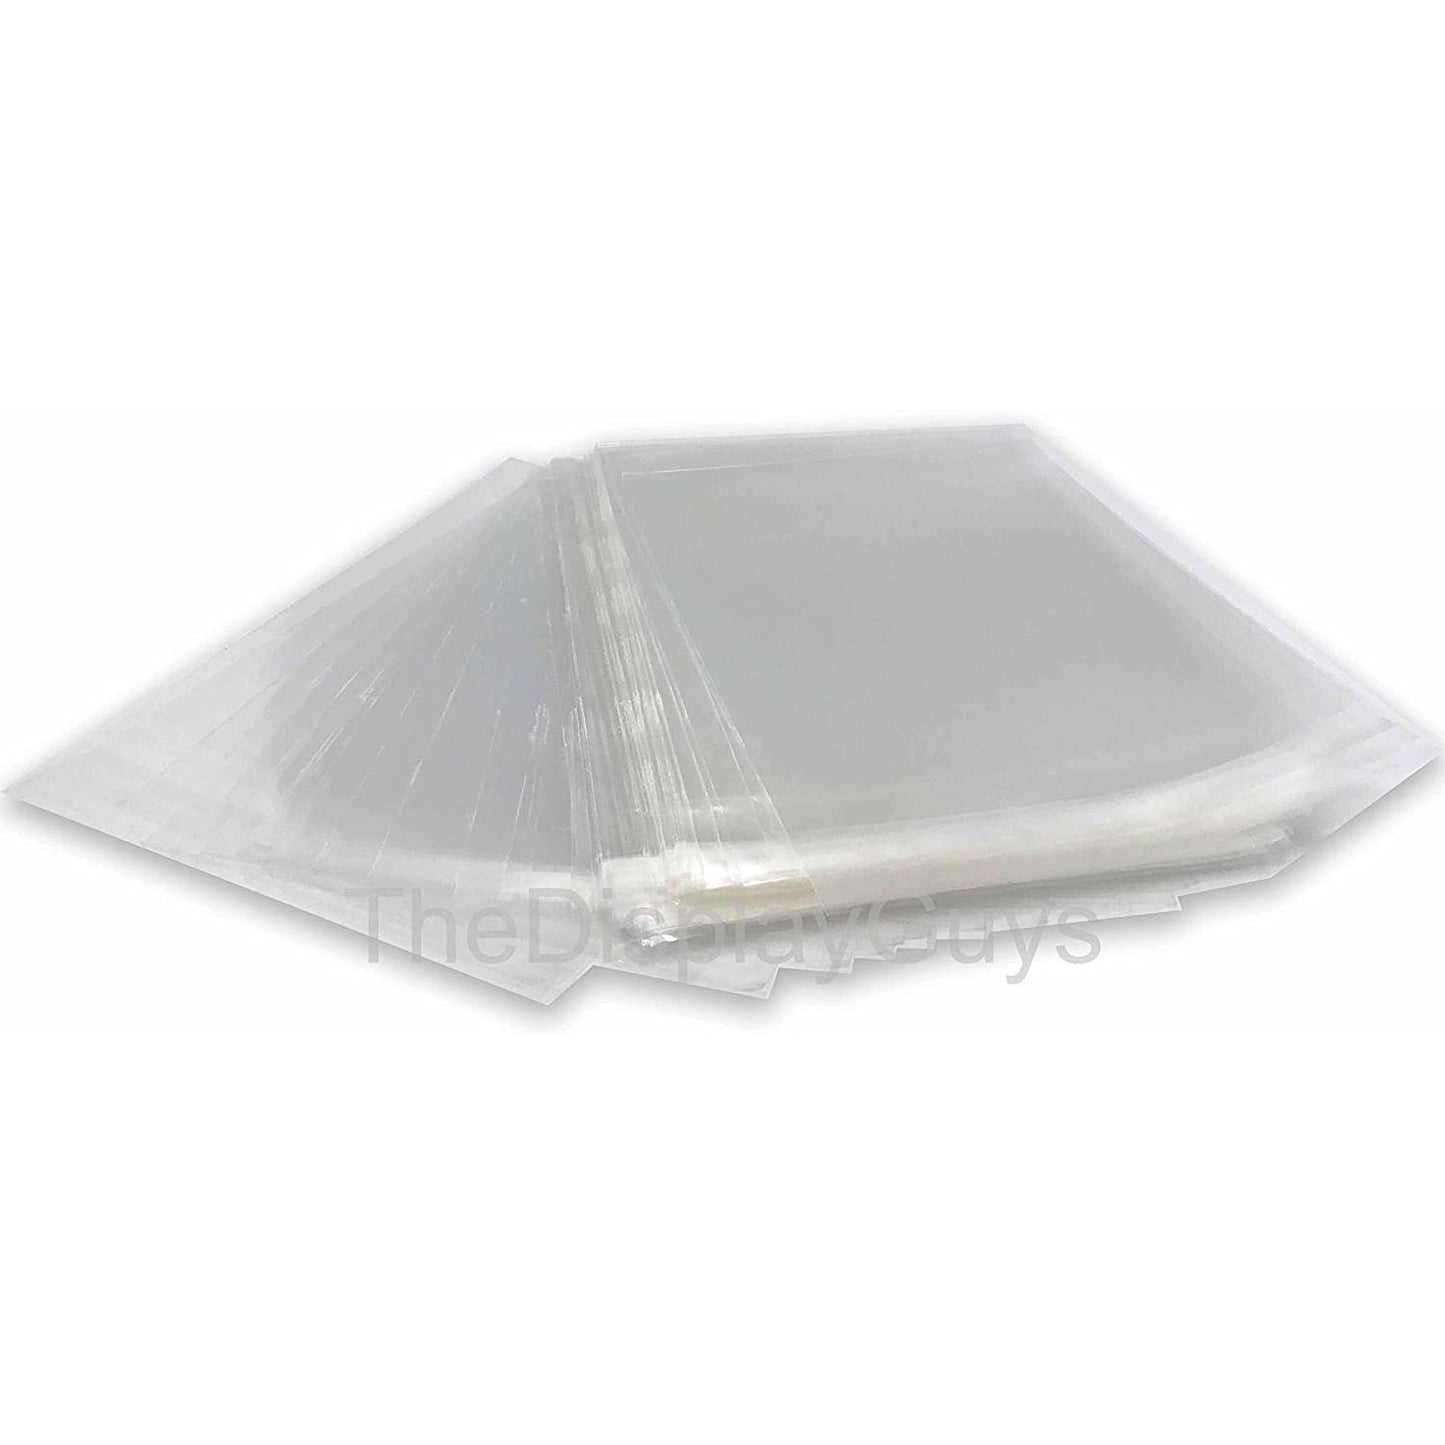 8 7/16" x 12 1/4" 100 Pack Clear Self Adhesive Plastic Bags for 8" x 12" Photos